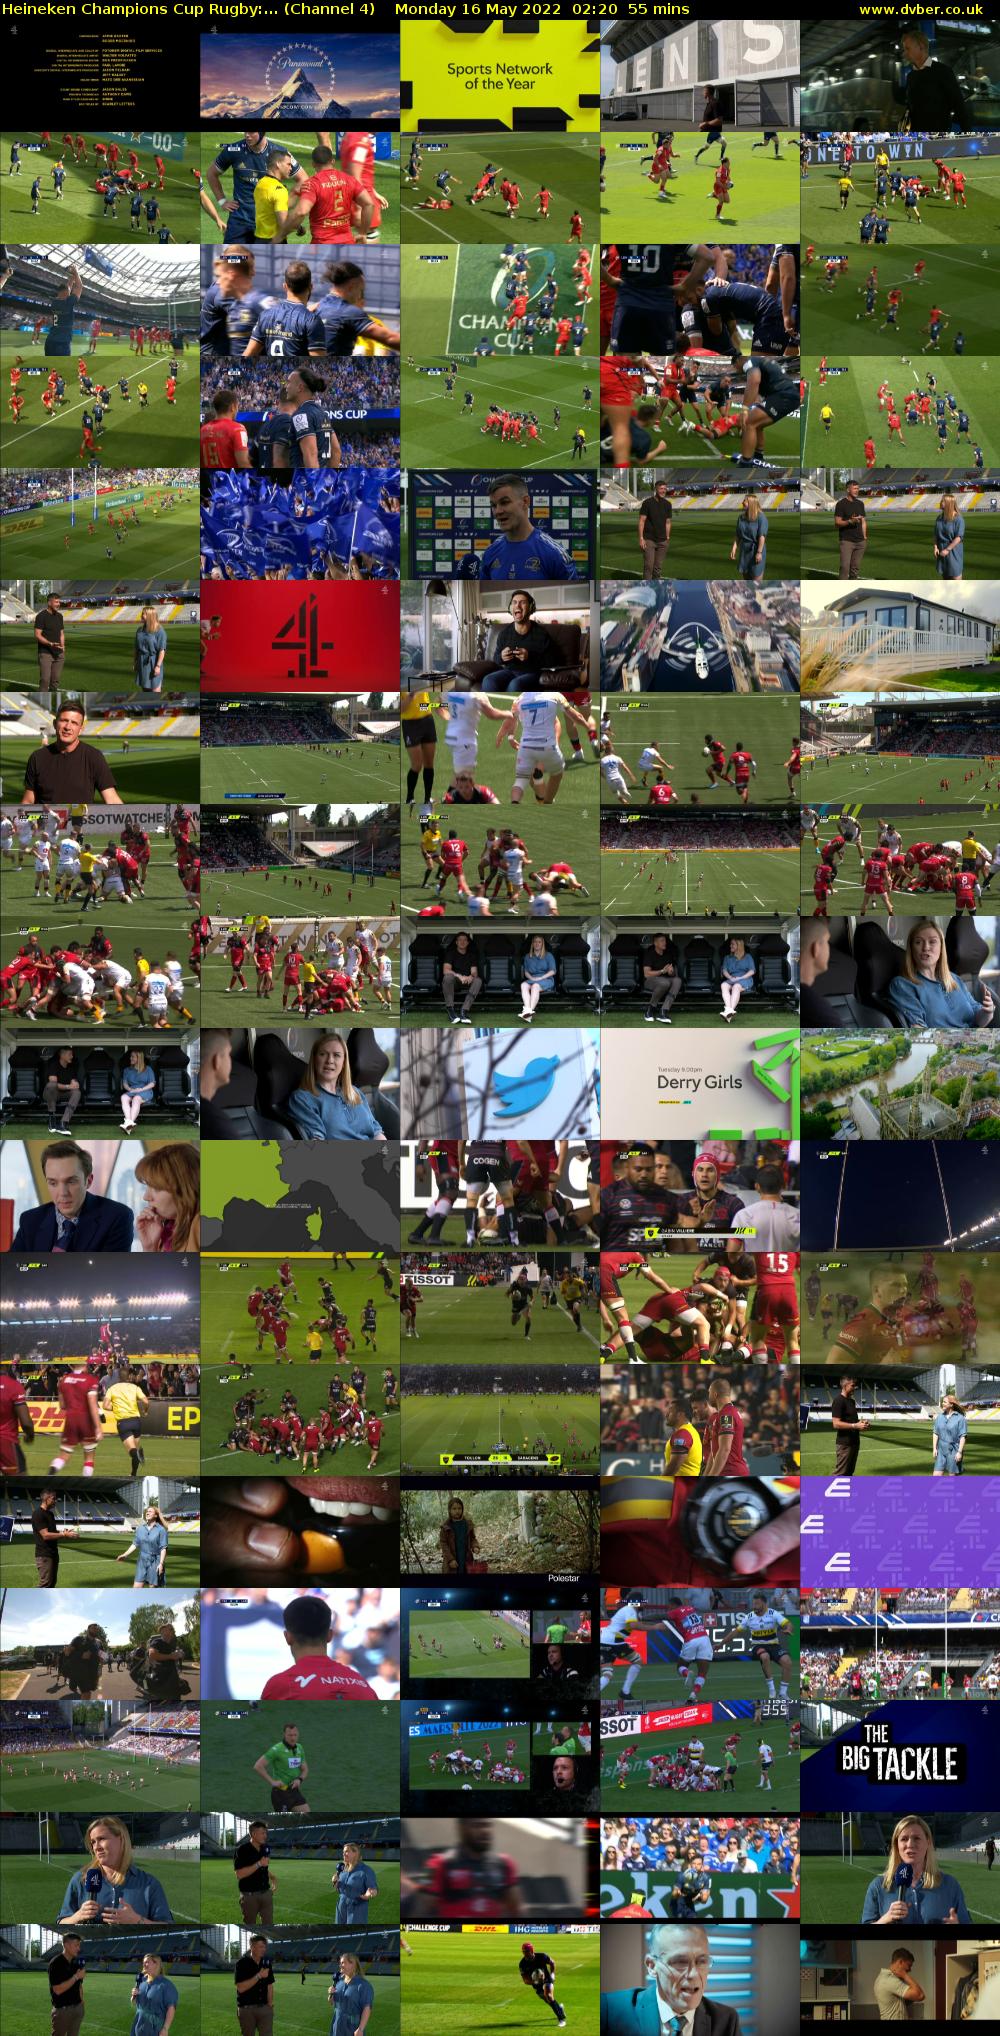 Heineken Champions Cup Rugby:... (Channel 4) Monday 16 May 2022 02:20 - 03:15